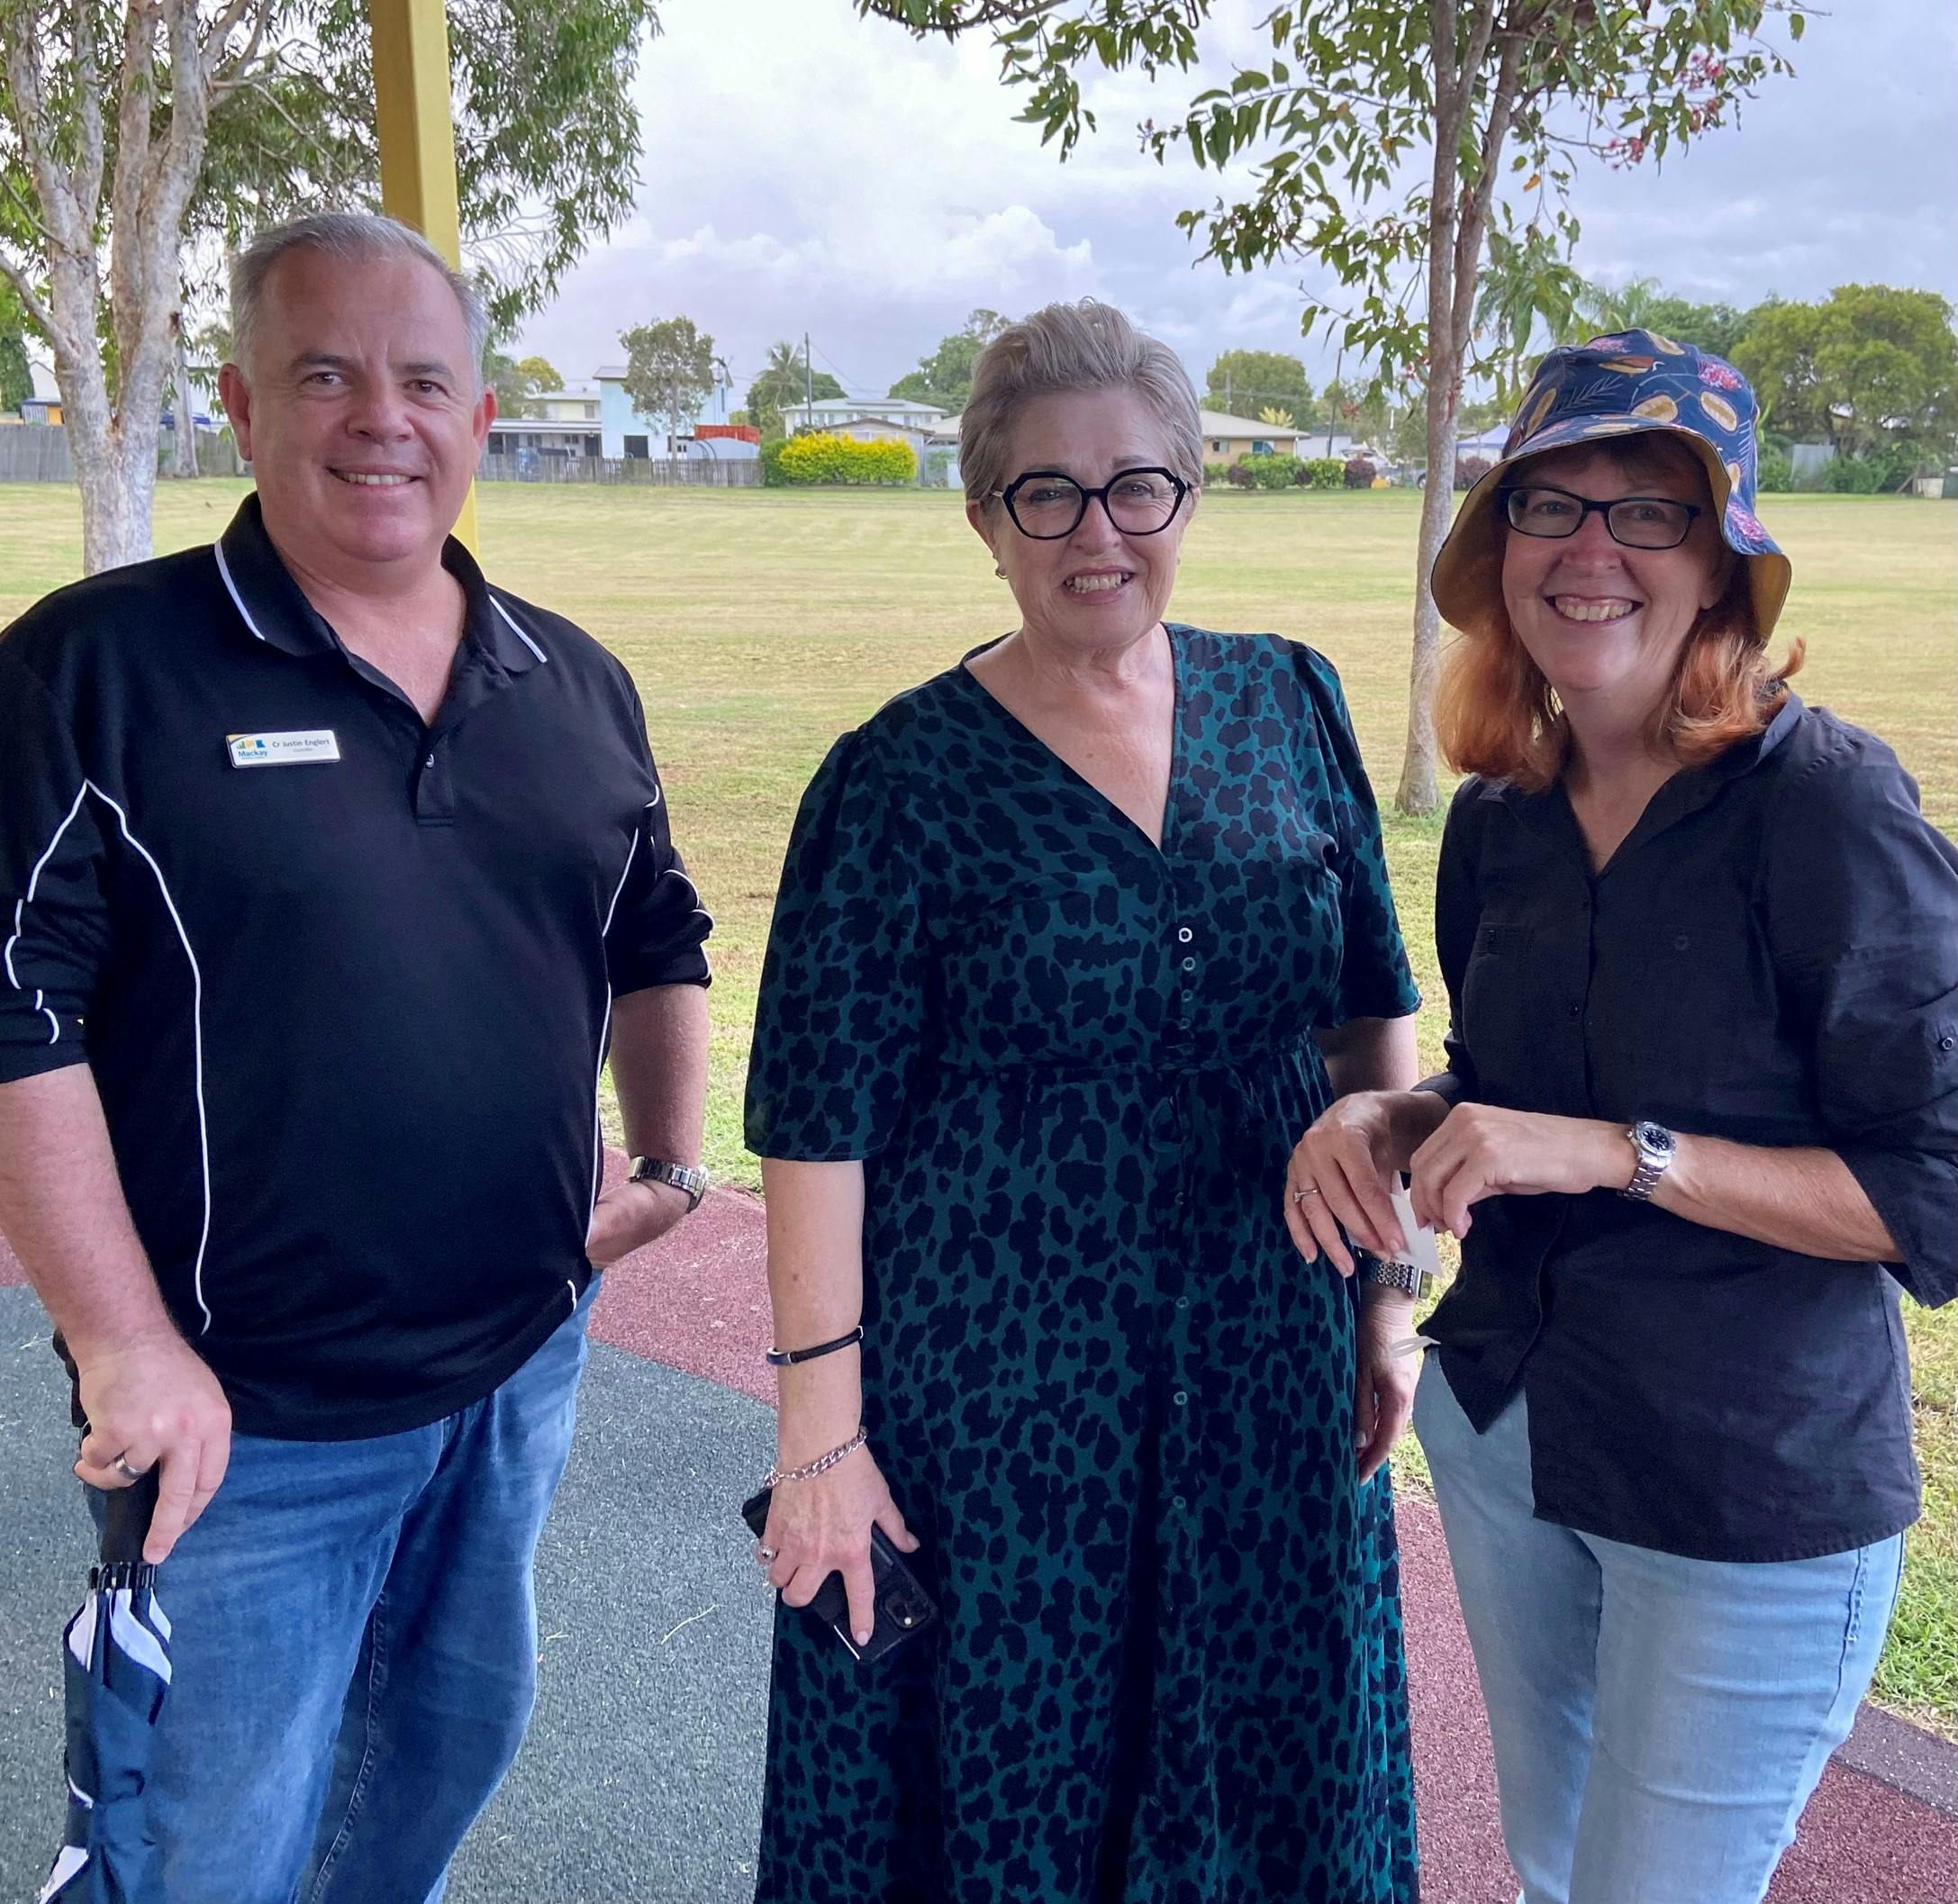 Councillors Justin Englert and Fran Mann attended the Alsatia Park consultation session with council's Principal Parks Planner Tracie Harvison.